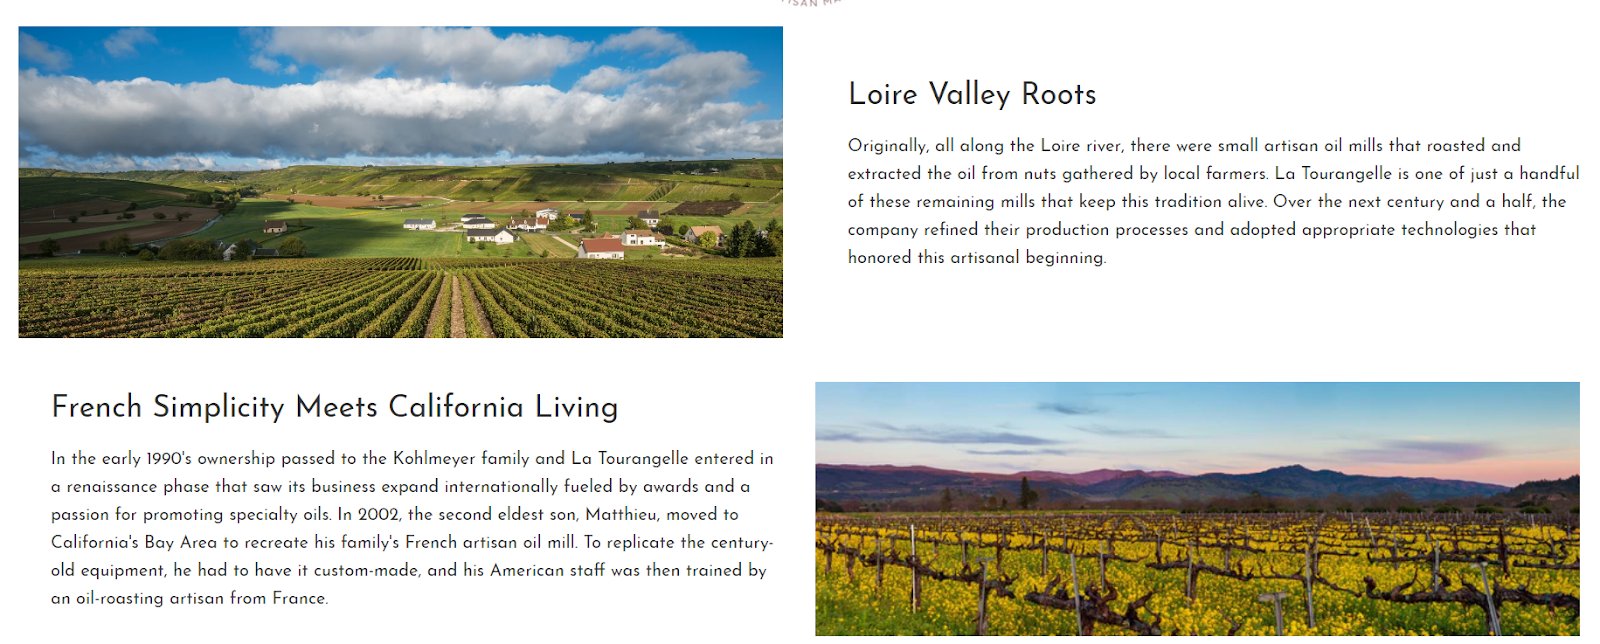 descriptions about the Loire Valley and growing in California